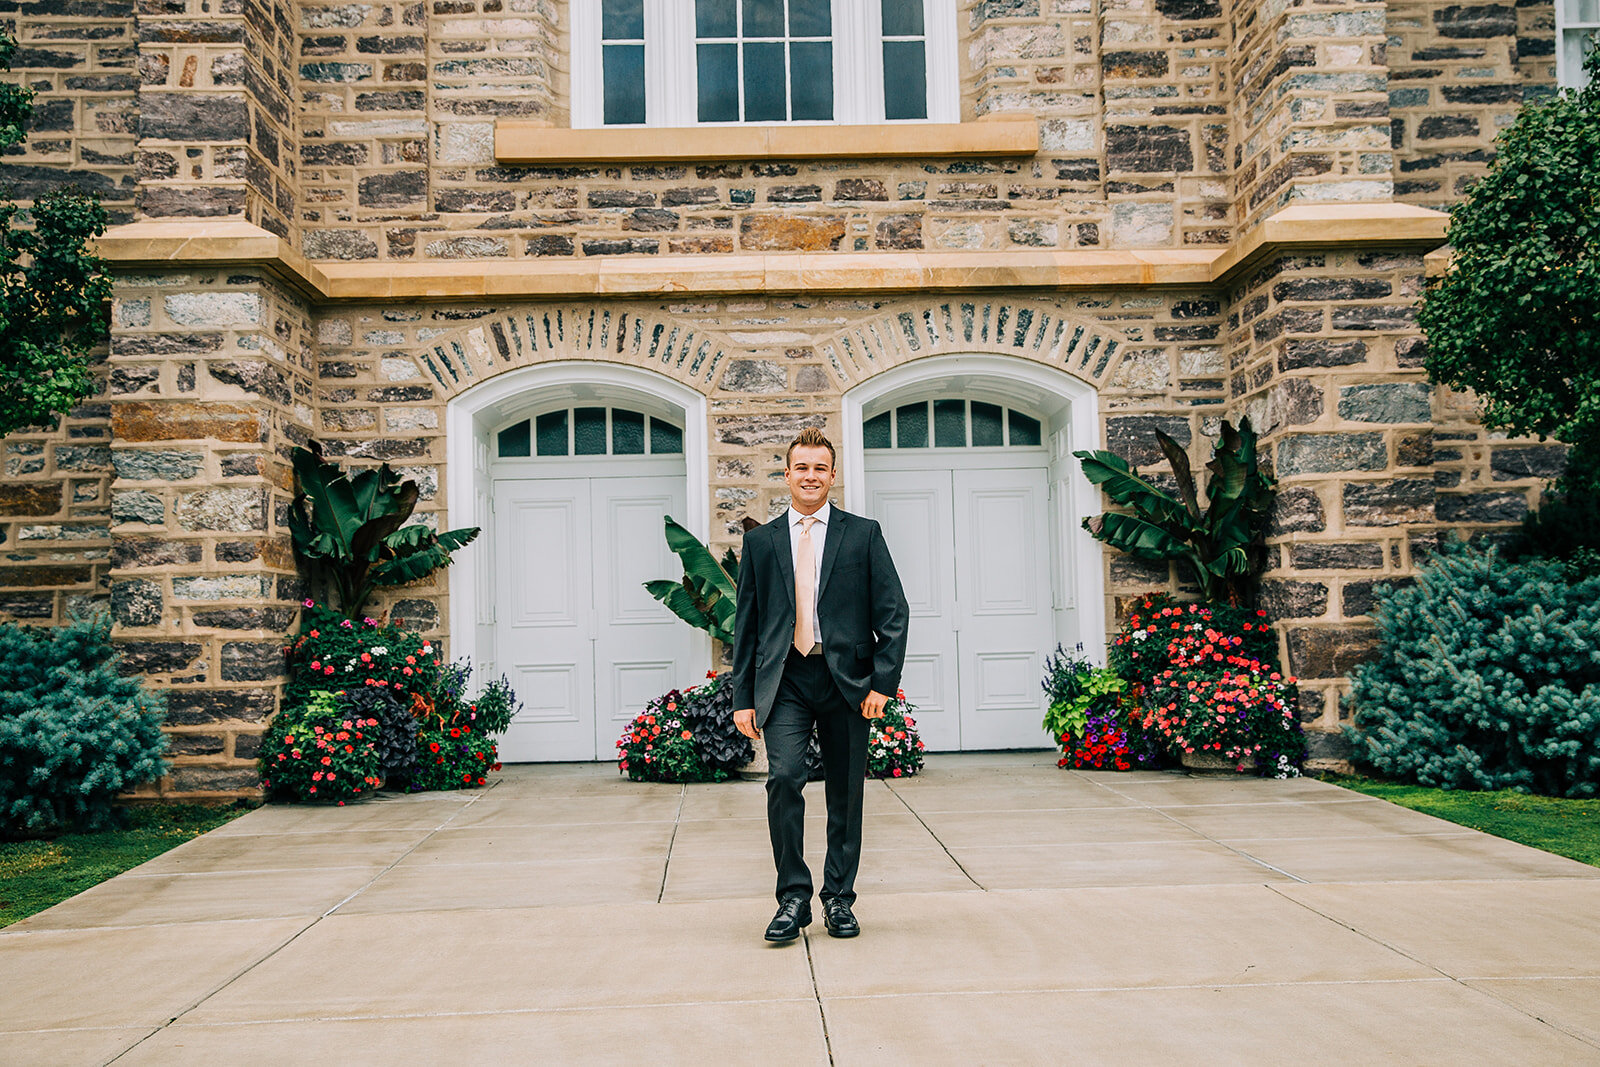  missionary in a black suit and peach tie at the logan utah temple stone and brick building young man posing hand in pocket missionary photo pose ideas professional senior portraits classy senior session bella alder photography cache valley #bellaald